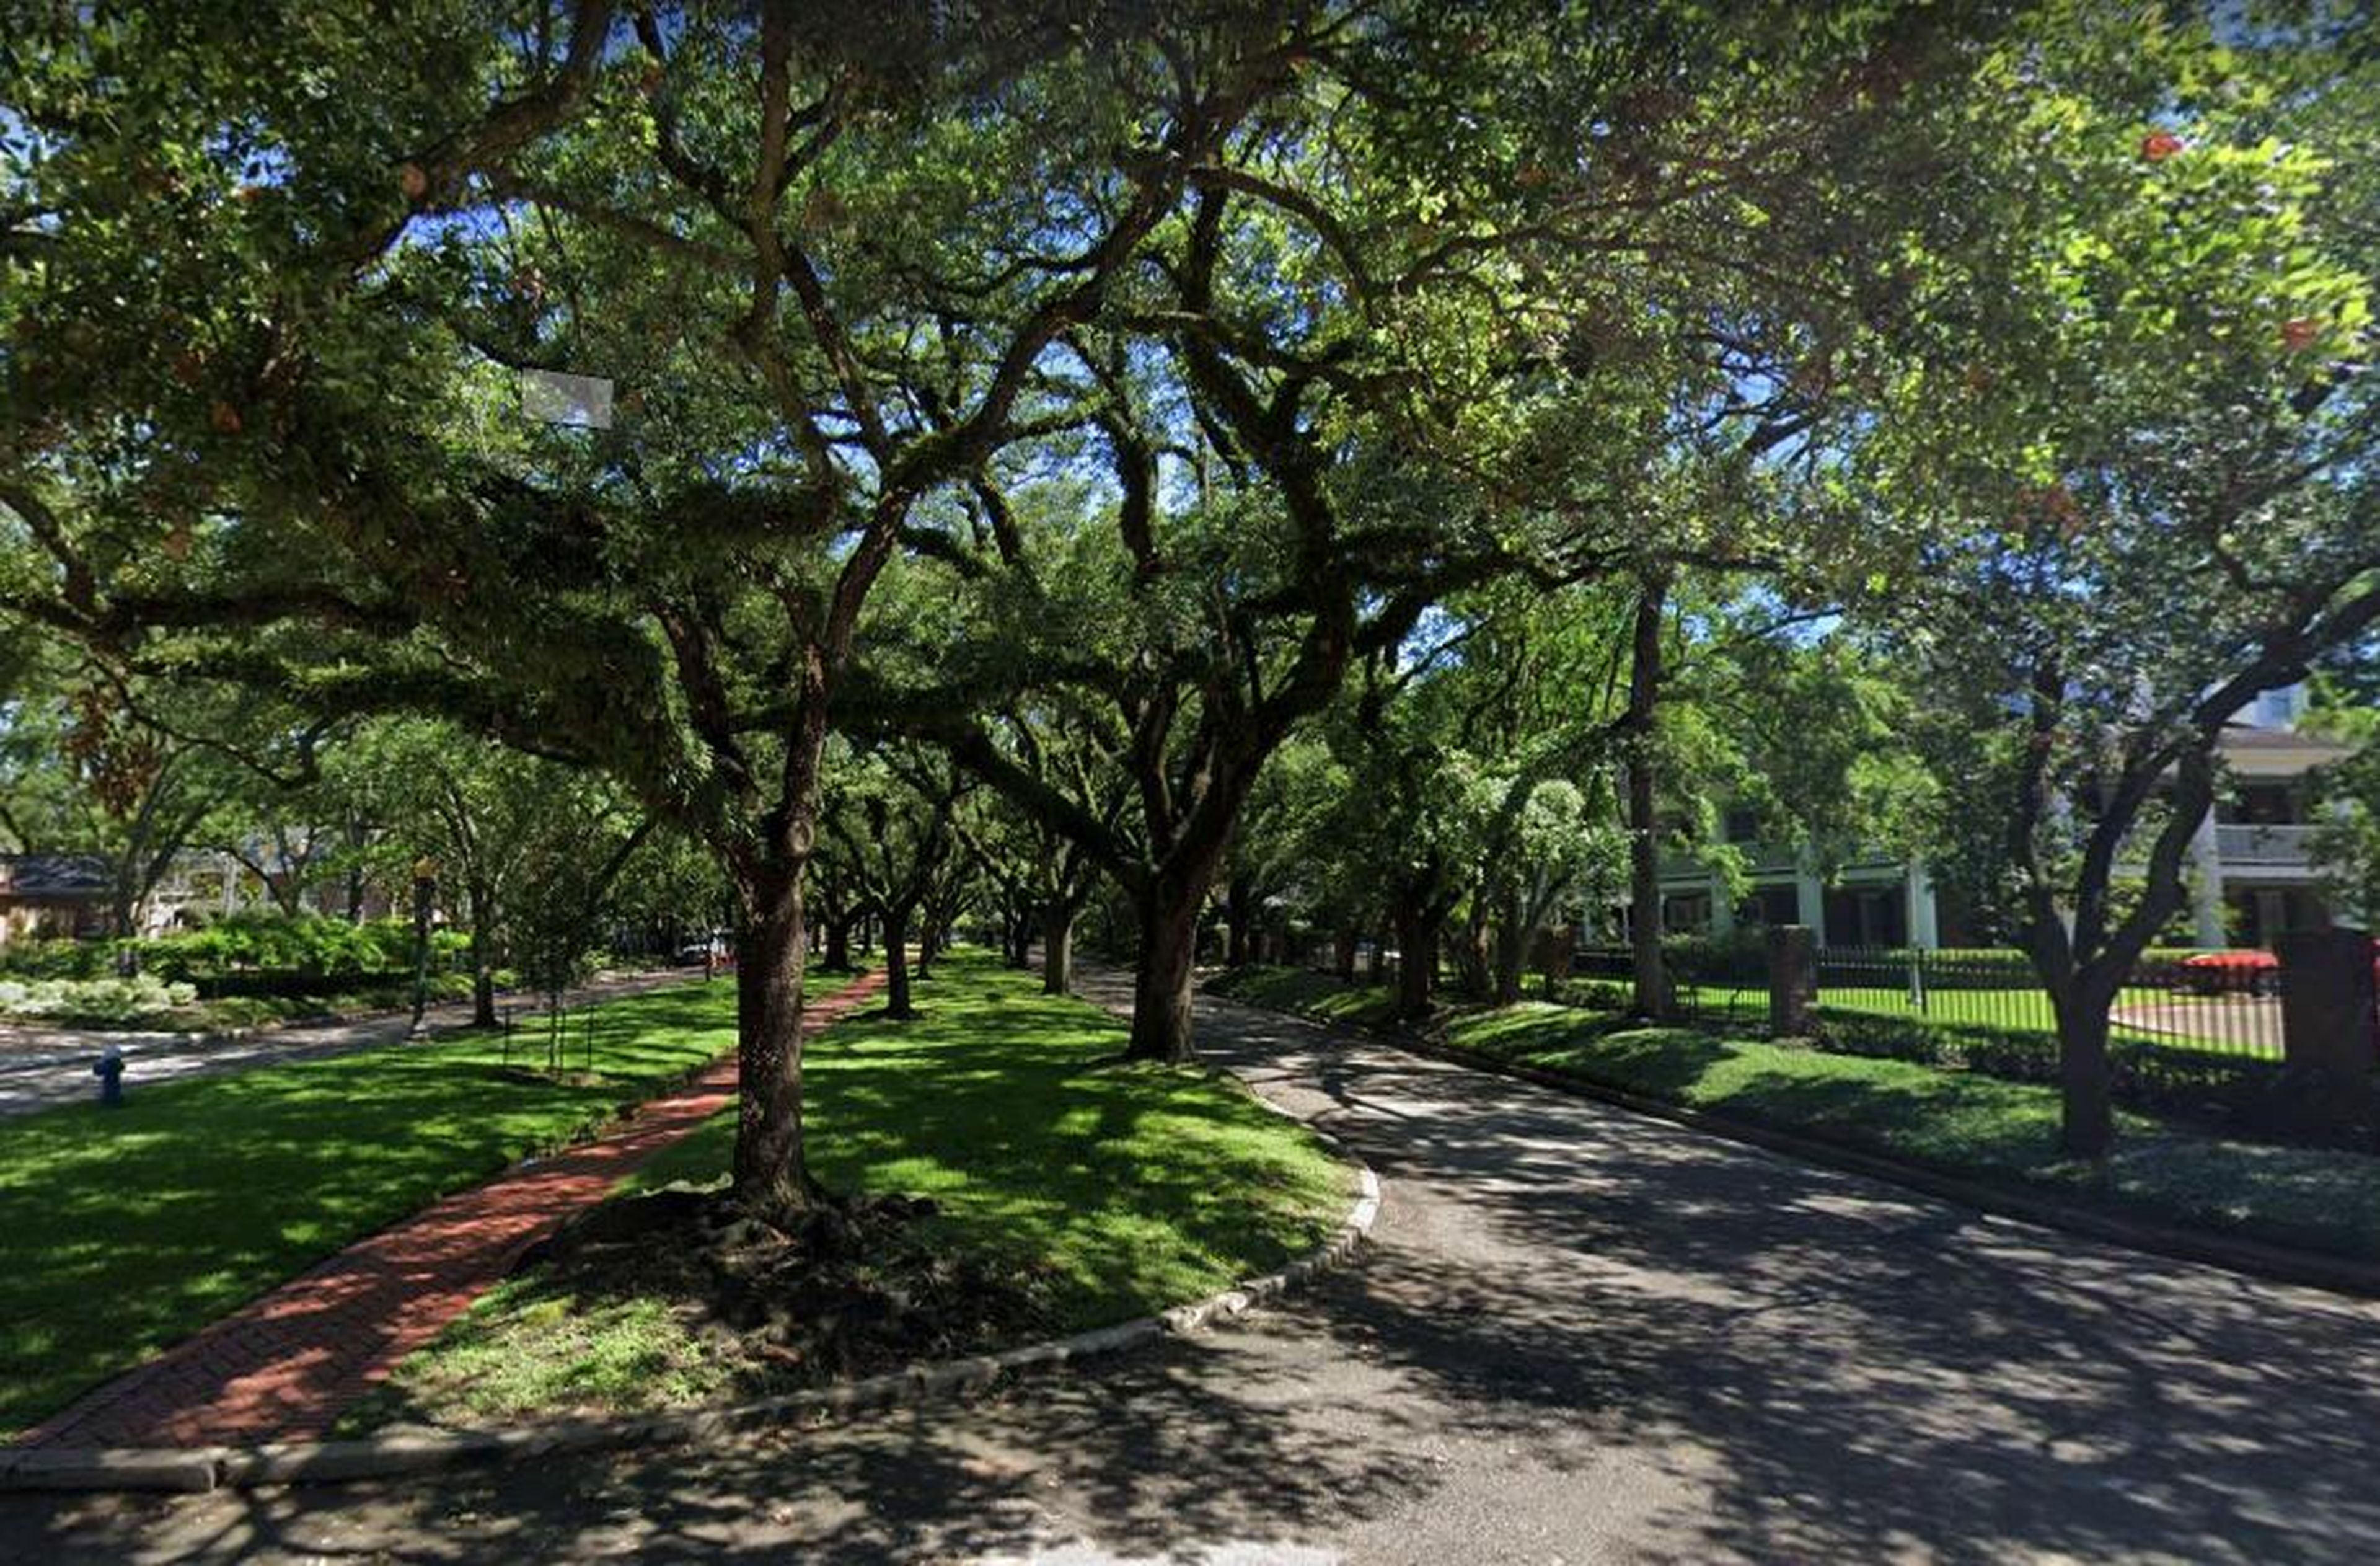 Photo-takers are drawn to Houston's Broadacres neighborhood, where a scenic walkway lined with trees cuts through an affluent residential area.